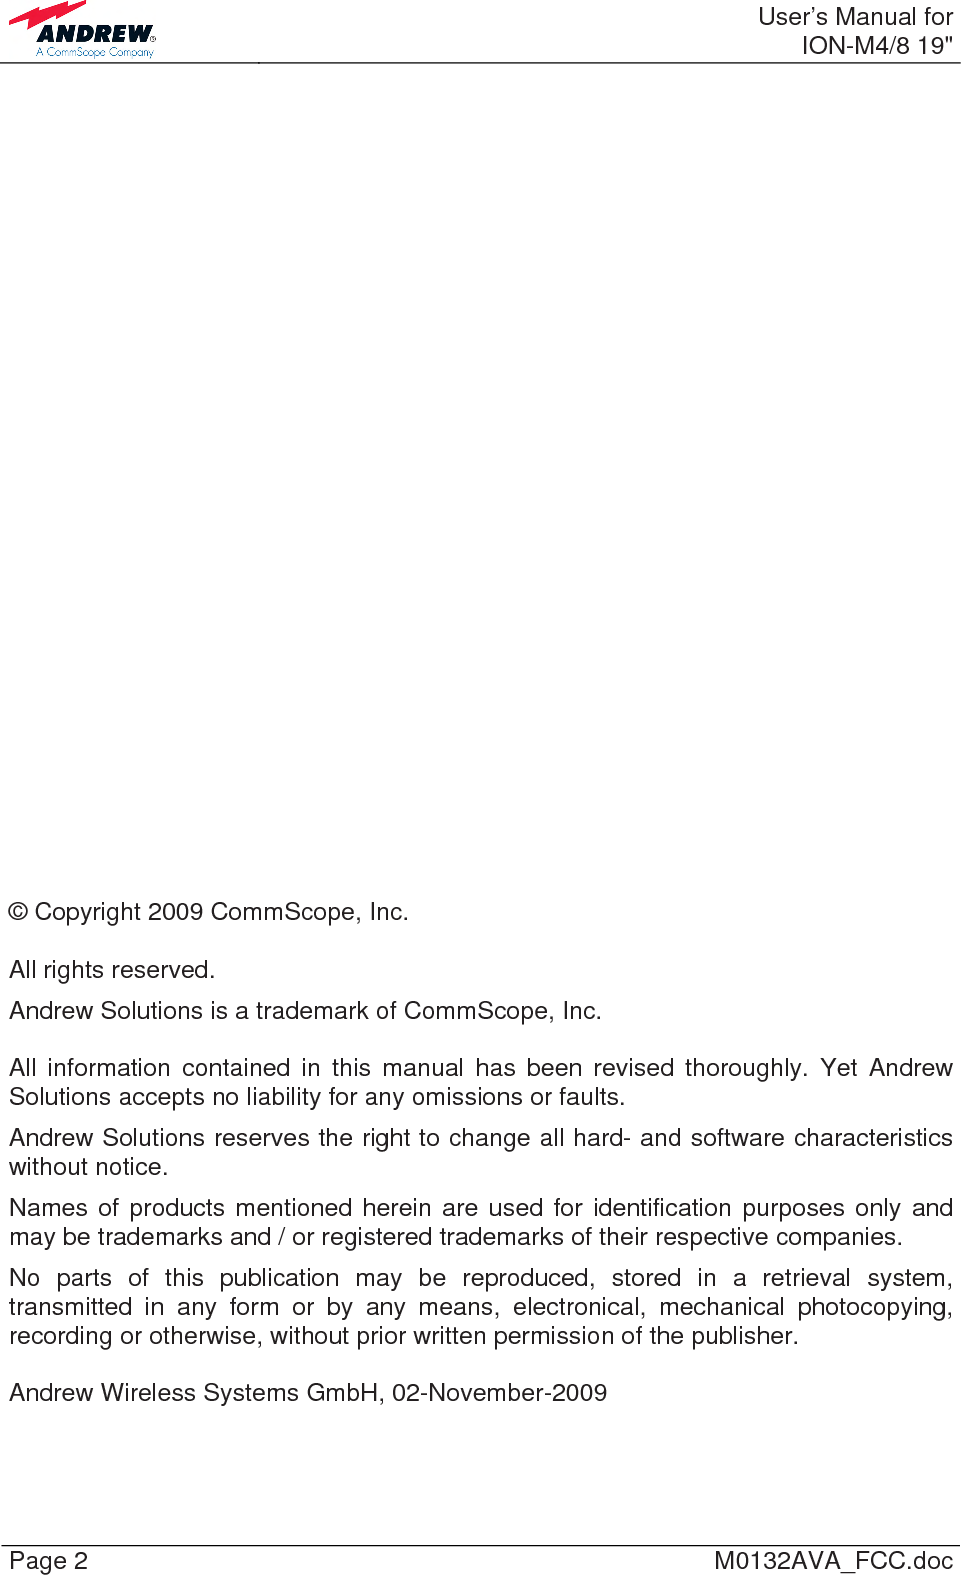  User’s Manual forION-M4/8 19&quot; Page 2  M0132AVA_FCC.doc                             © Copyright 2009 CommScope, Inc.  All rights reserved. Andrew Solutions is a trademark of CommScope, Inc.  All information contained in this manual has been revised thoroughly. Yet Andrew Solutions accepts no liability for any omissions or faults. Andrew Solutions reserves the right to change all hard- and software characteristics without notice. Names of products mentioned herein are used for identification purposes only and may be trademarks and / or registered trademarks of their respective companies. No parts of this publication may be reproduced, stored in a retrieval system, transmitted in any form or by any means, electronical, mechanical photocopying, recording or otherwise, without prior written permission of the publisher.  Andrew Wireless Systems GmbH, 02-November-2009  